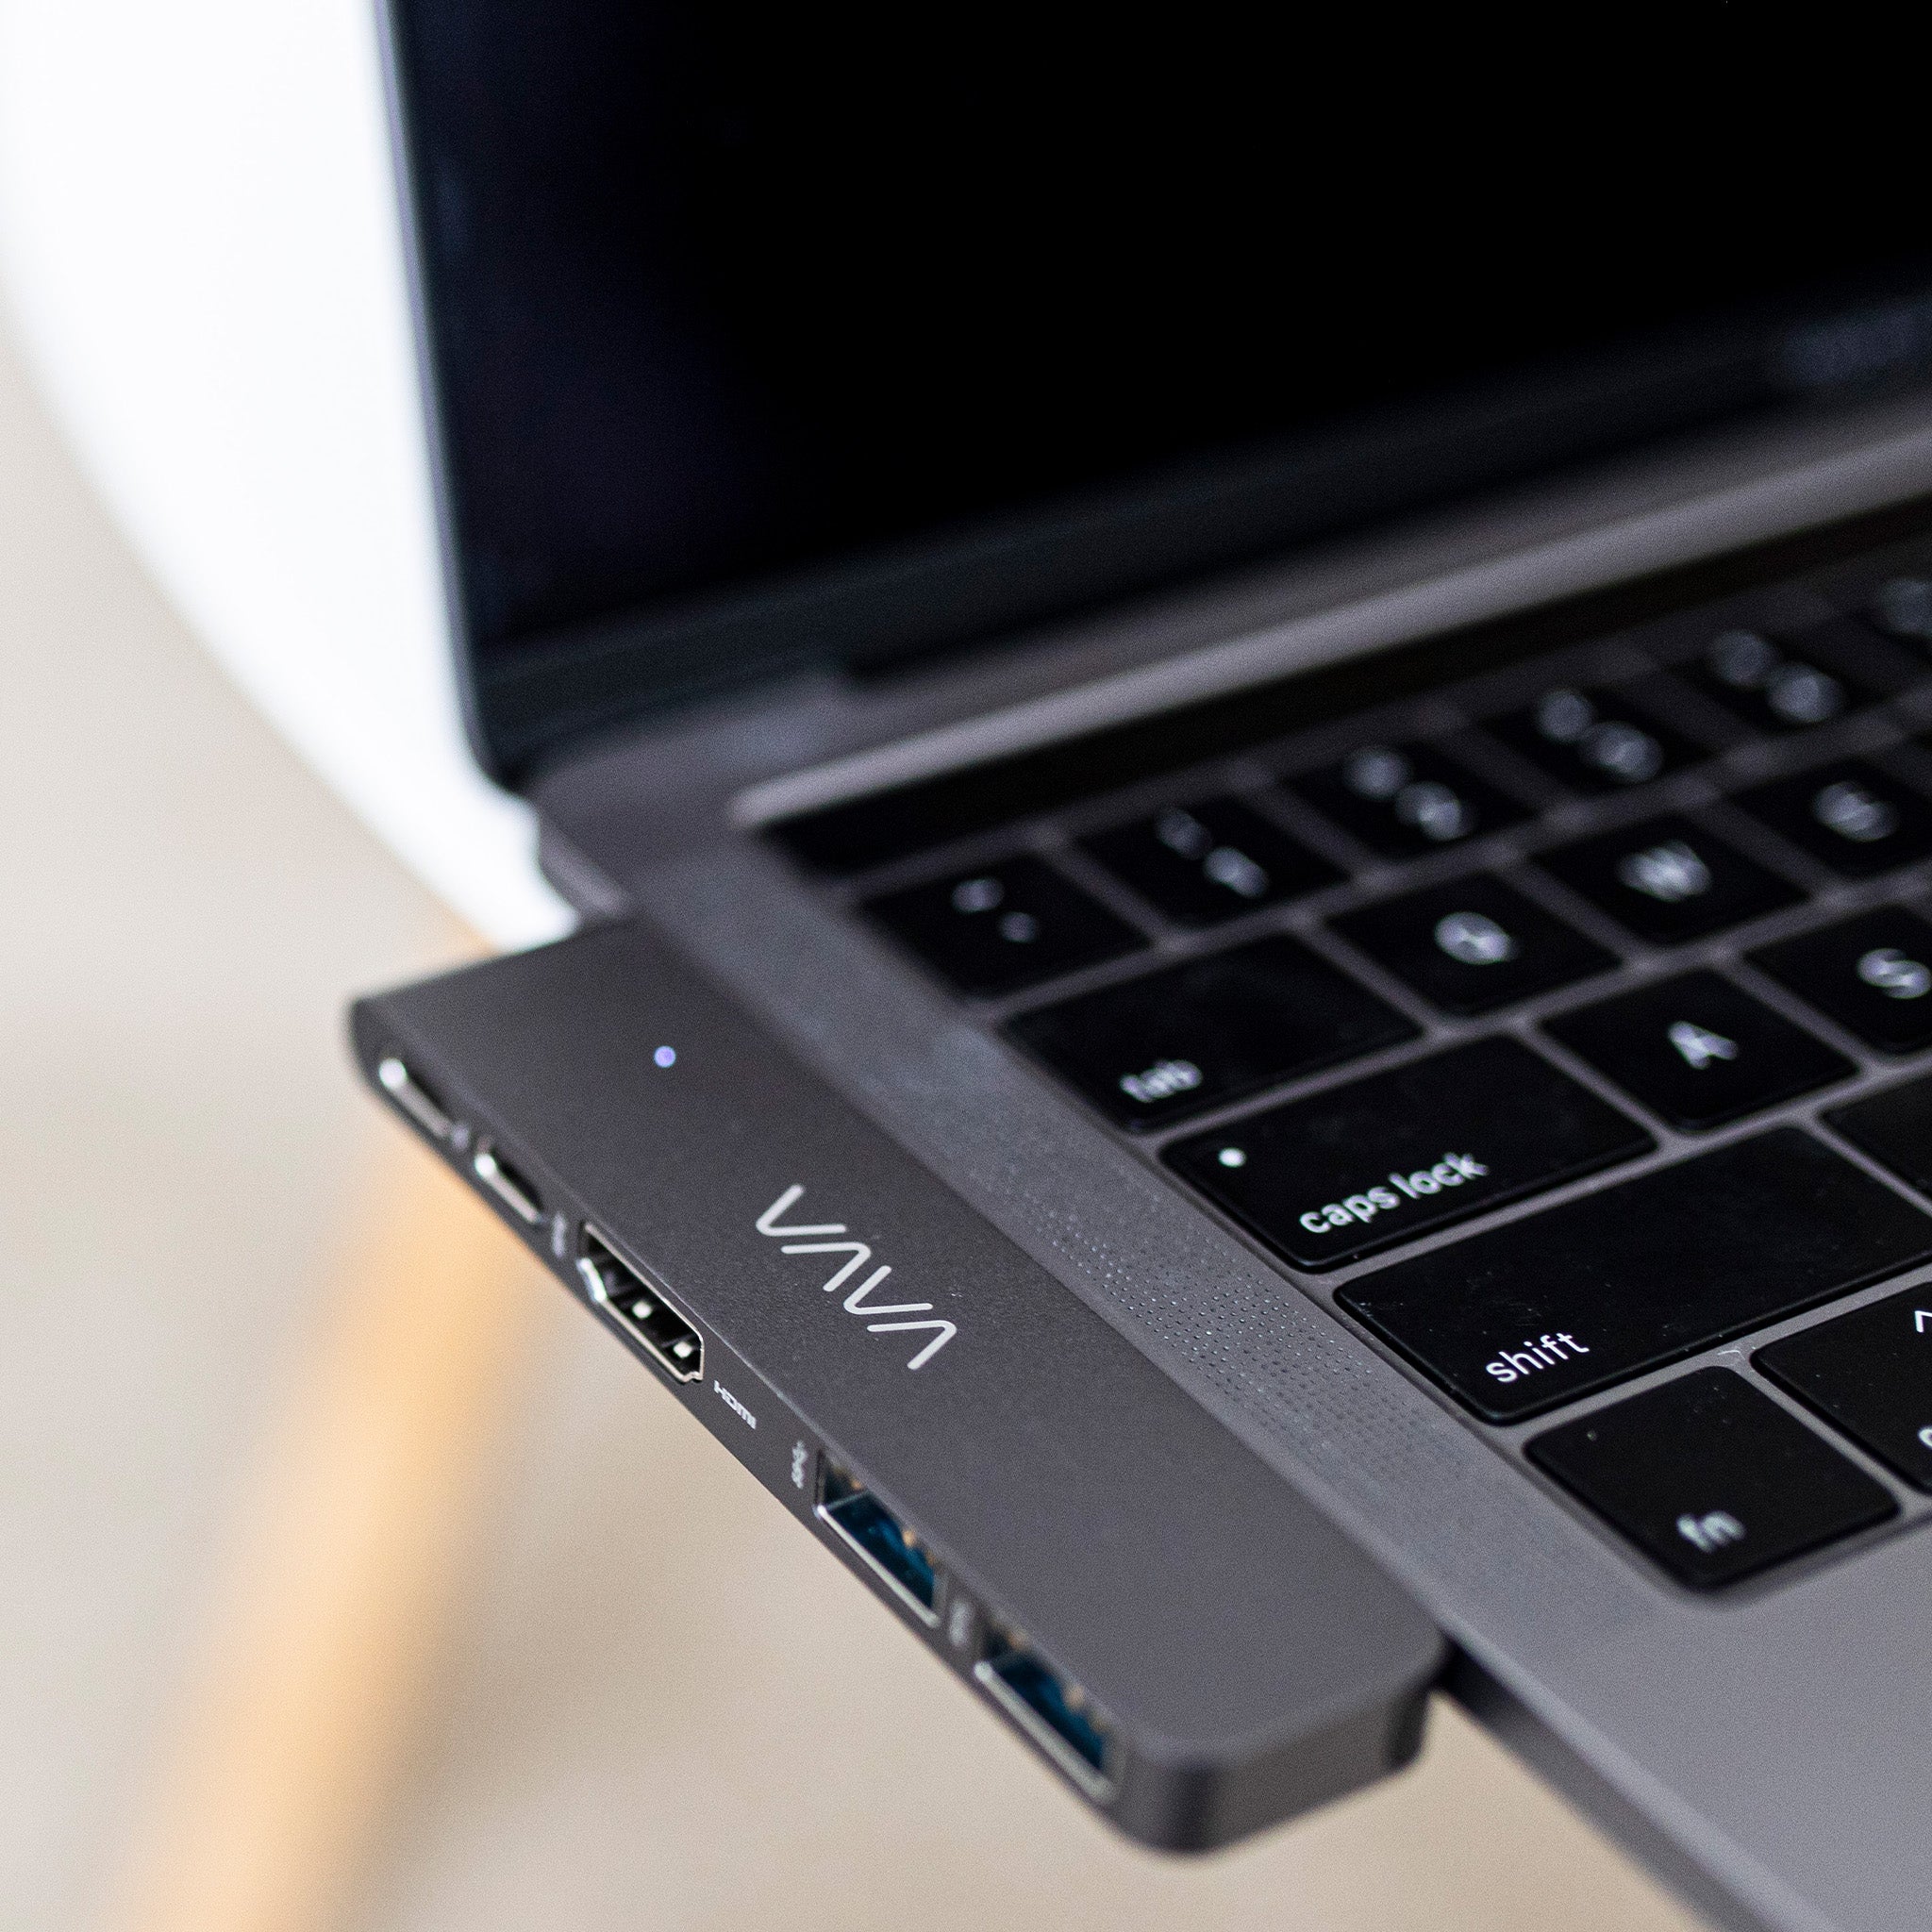 VAVA 5-in-2 USB-C Hub connected to laptop